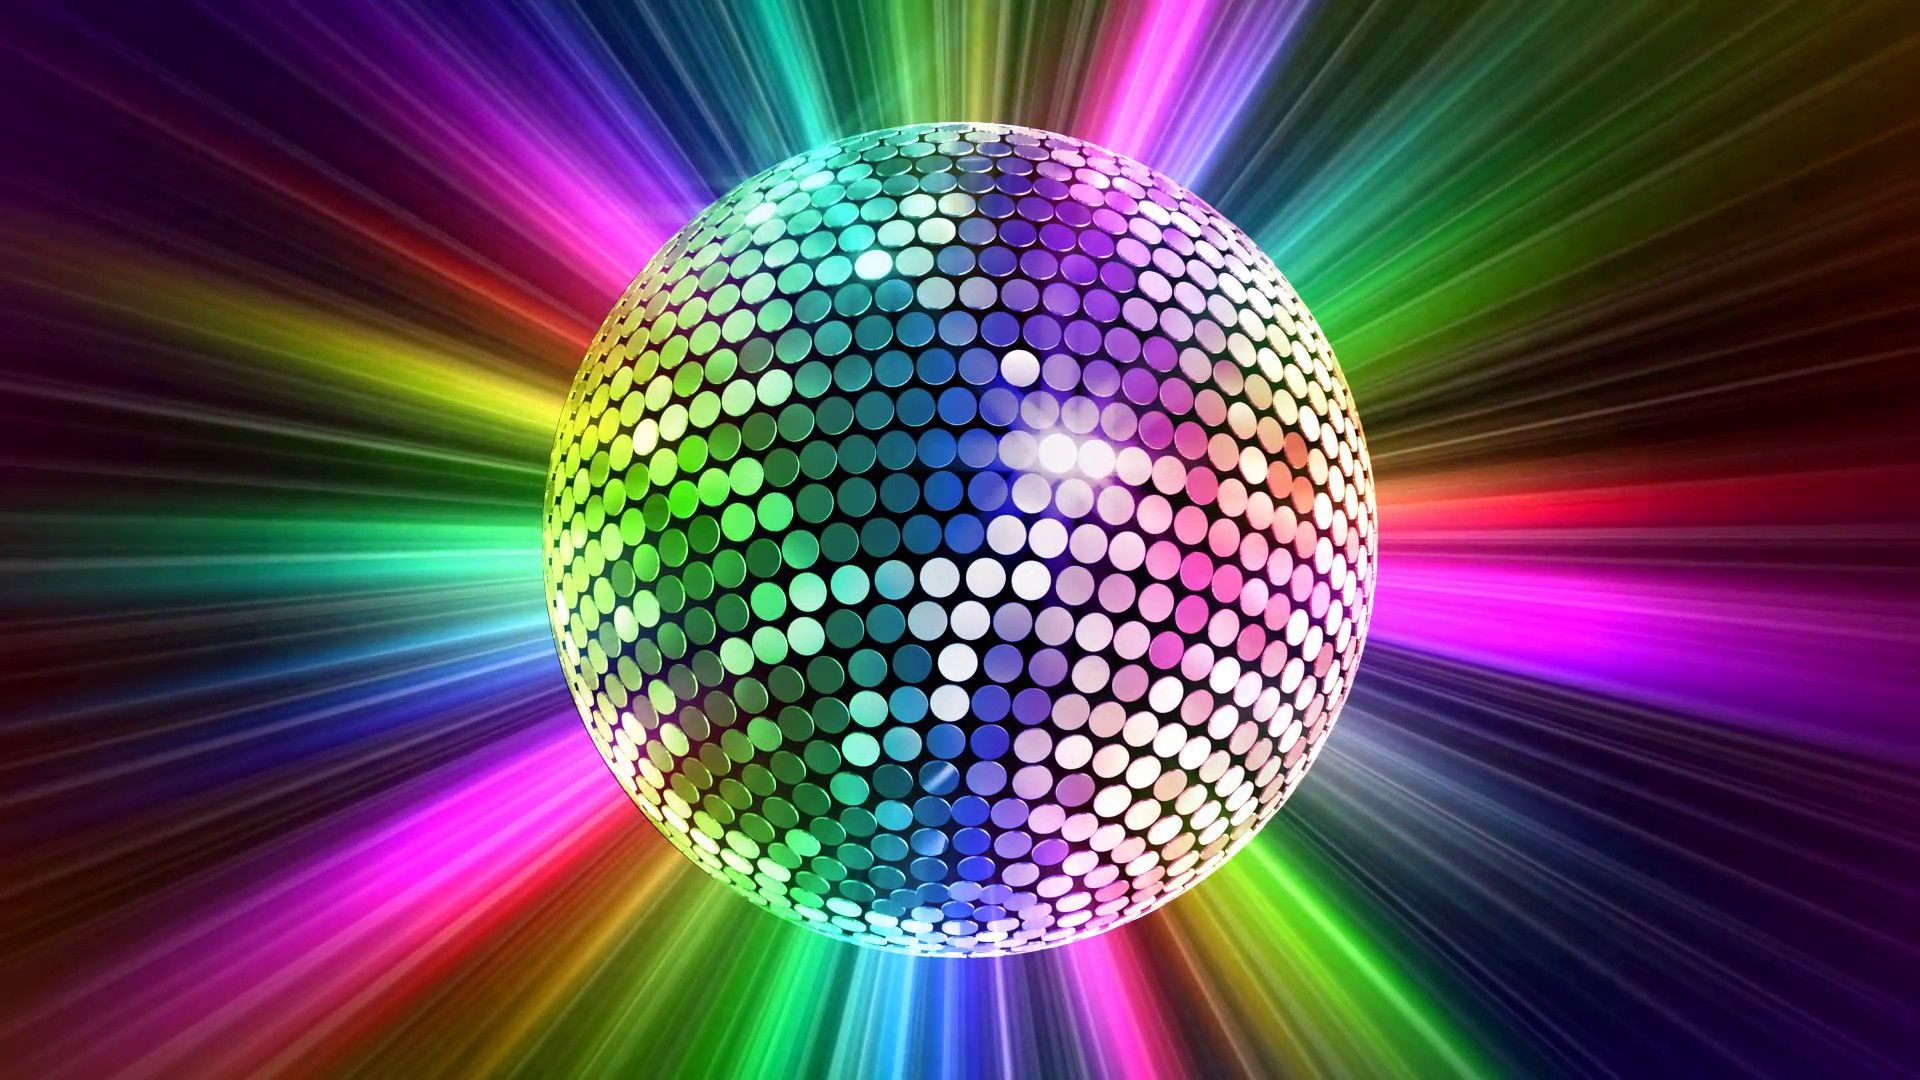 Disco: A mirror ball, Radiant, Eye-catching, A mirrored surface, Lighting for the party. 1920x1080 Full HD Background.